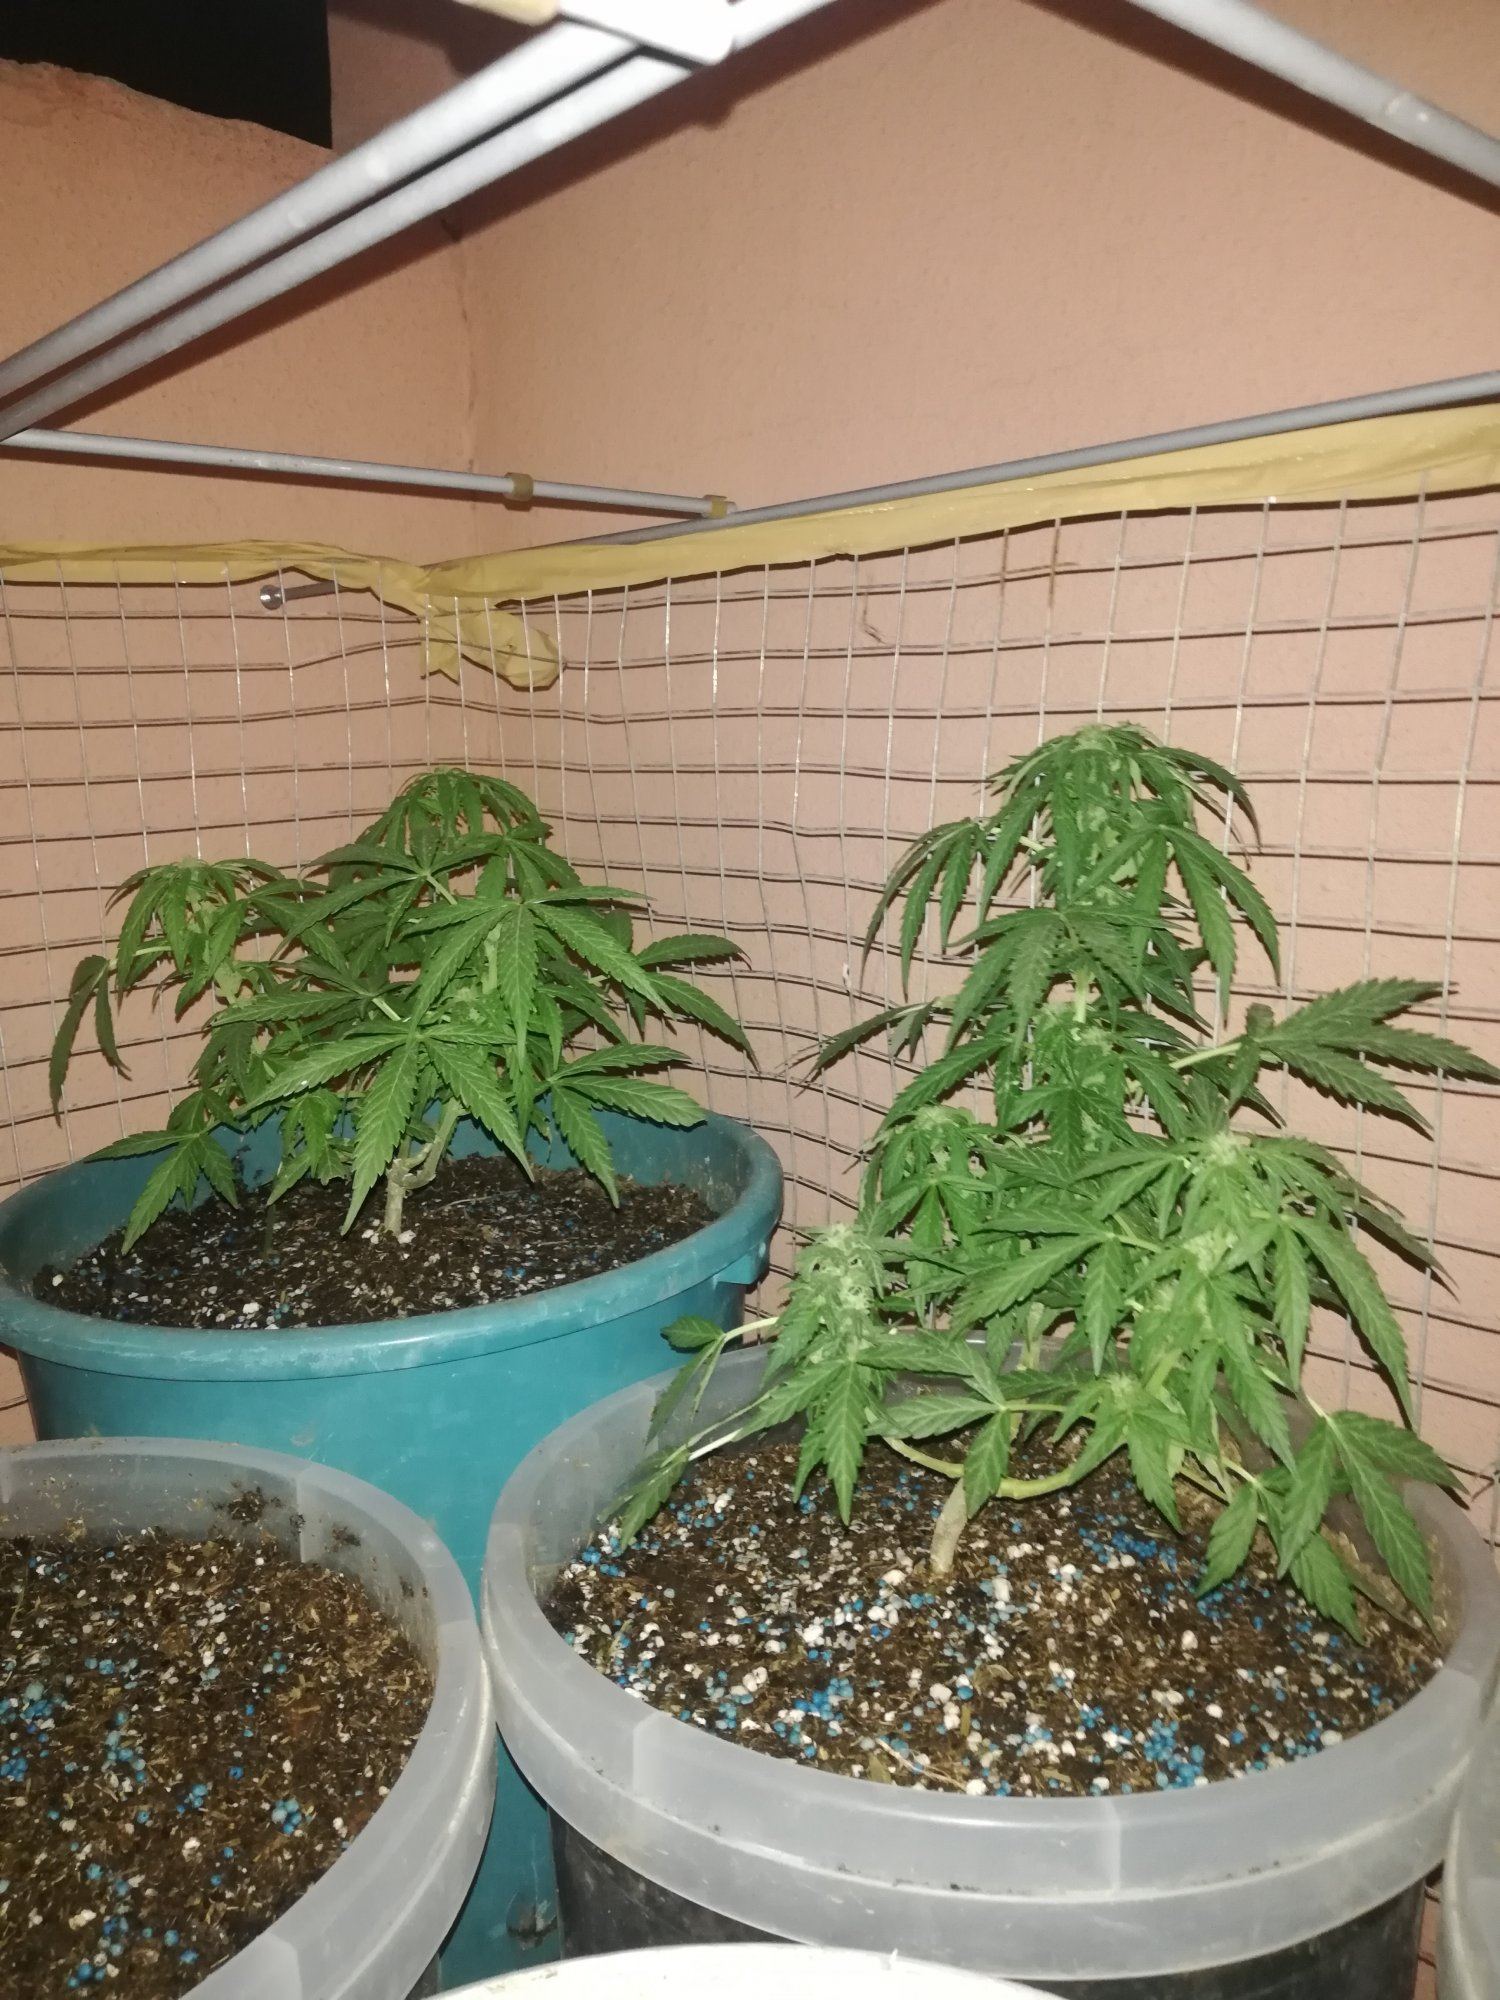 First trial autoflowering outdoor grow middle east country 8